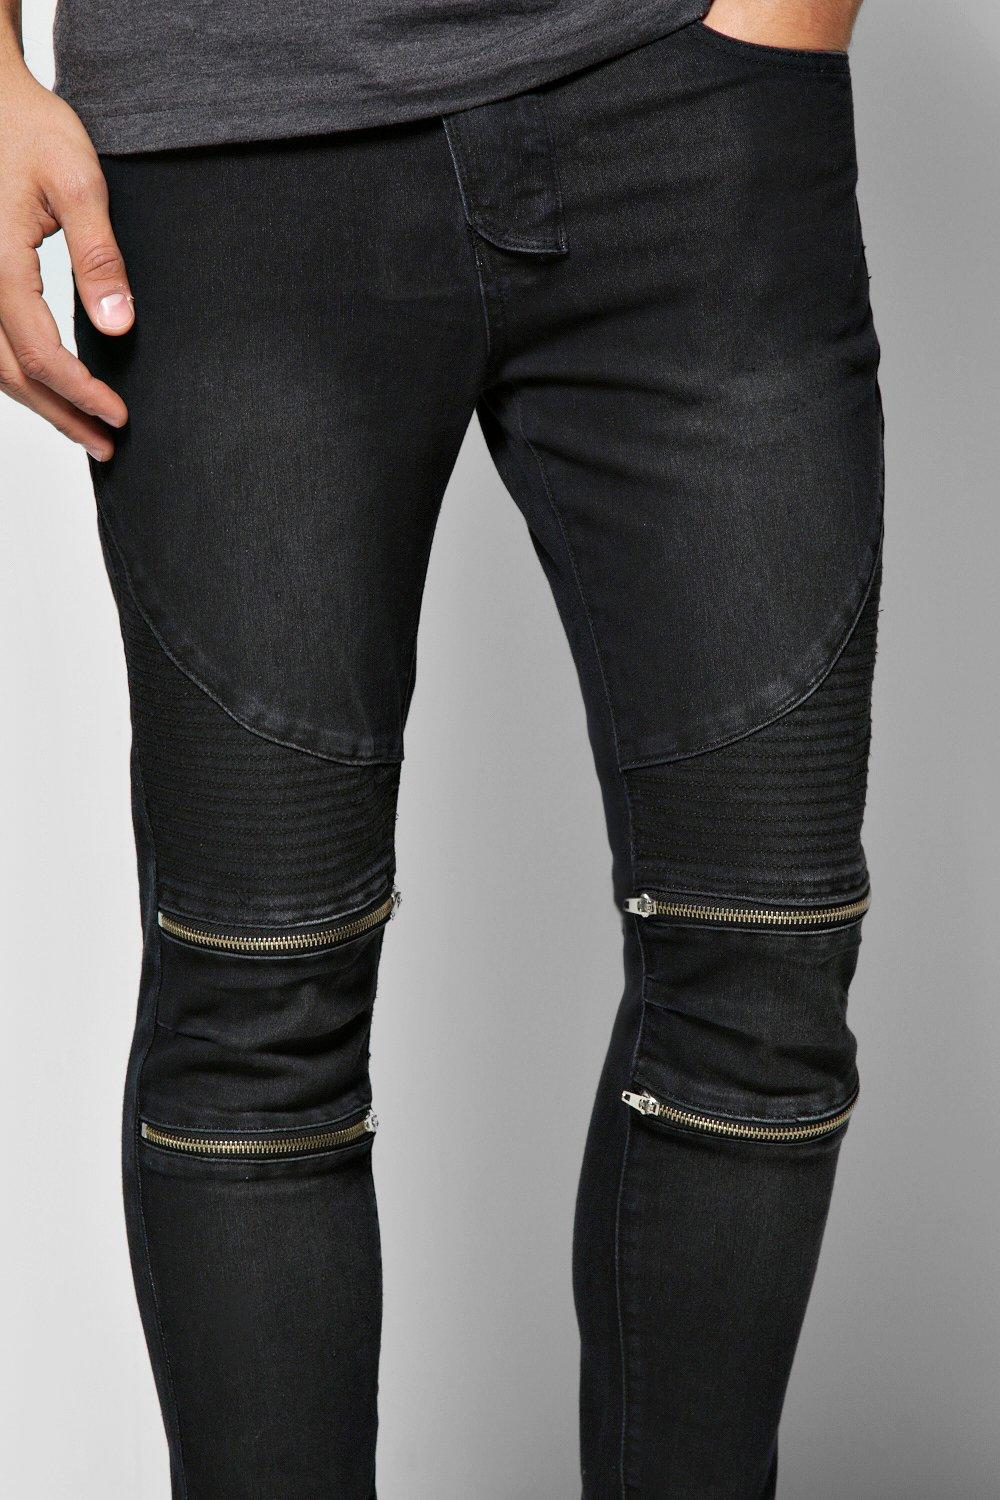 The Perfect Black Zipper Jeans - Biker Jeans Stacked Pants - AKINGS